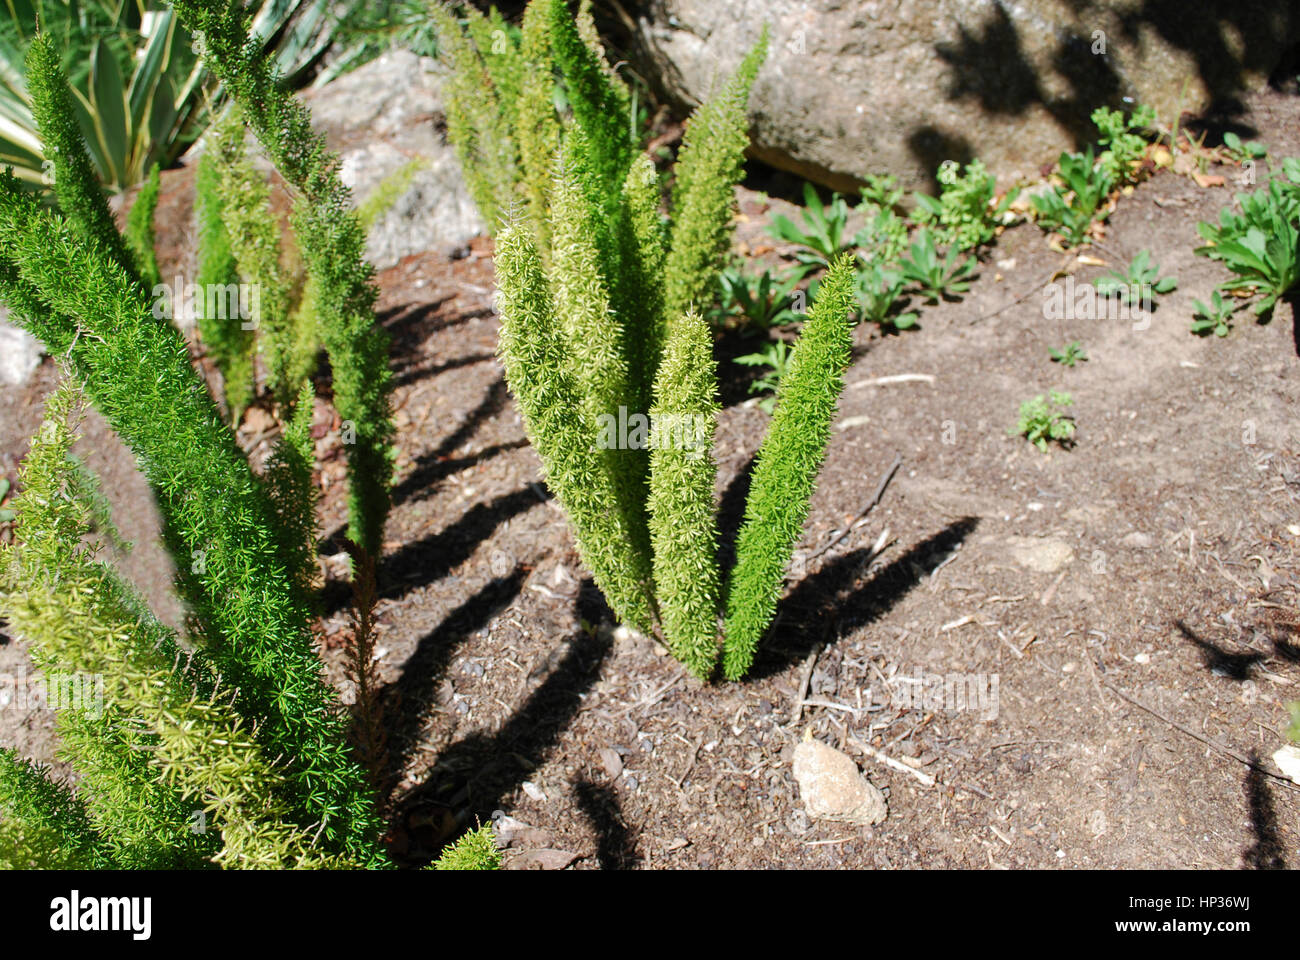 Asparagus 'Meyersii' is a scrambling, slightly woody plant, very compact, which looks like cat's tail-like fronds. Stock Photo